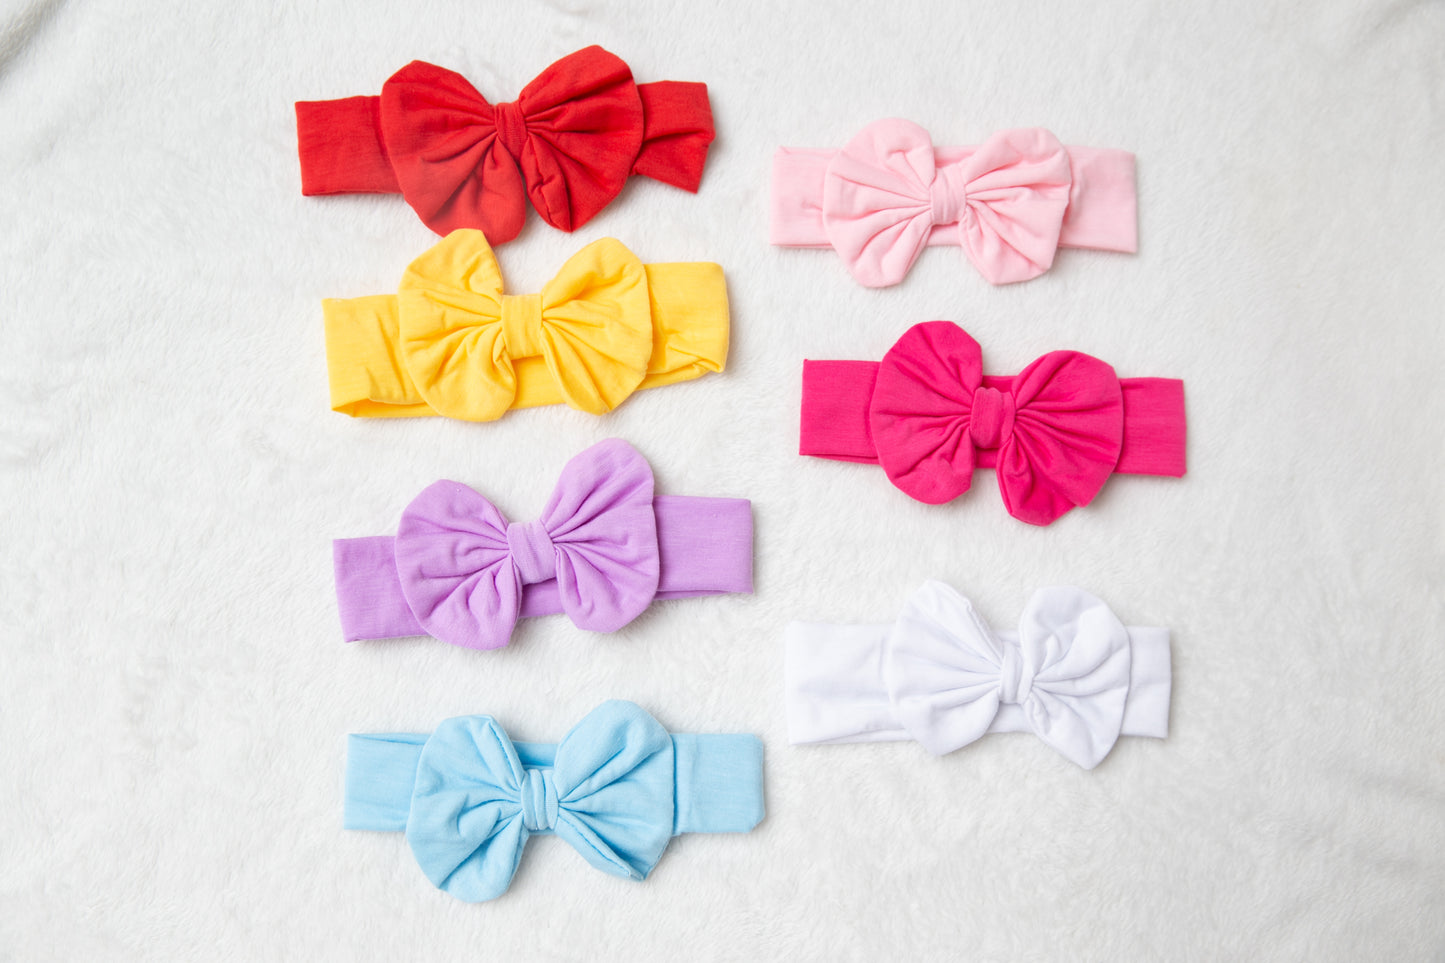 7 colors - Soft Baby Ribbed Headband, Top Knot Bow Girls newborn infant baby toddler soft Headband, red hot pink yellow baby headband bows